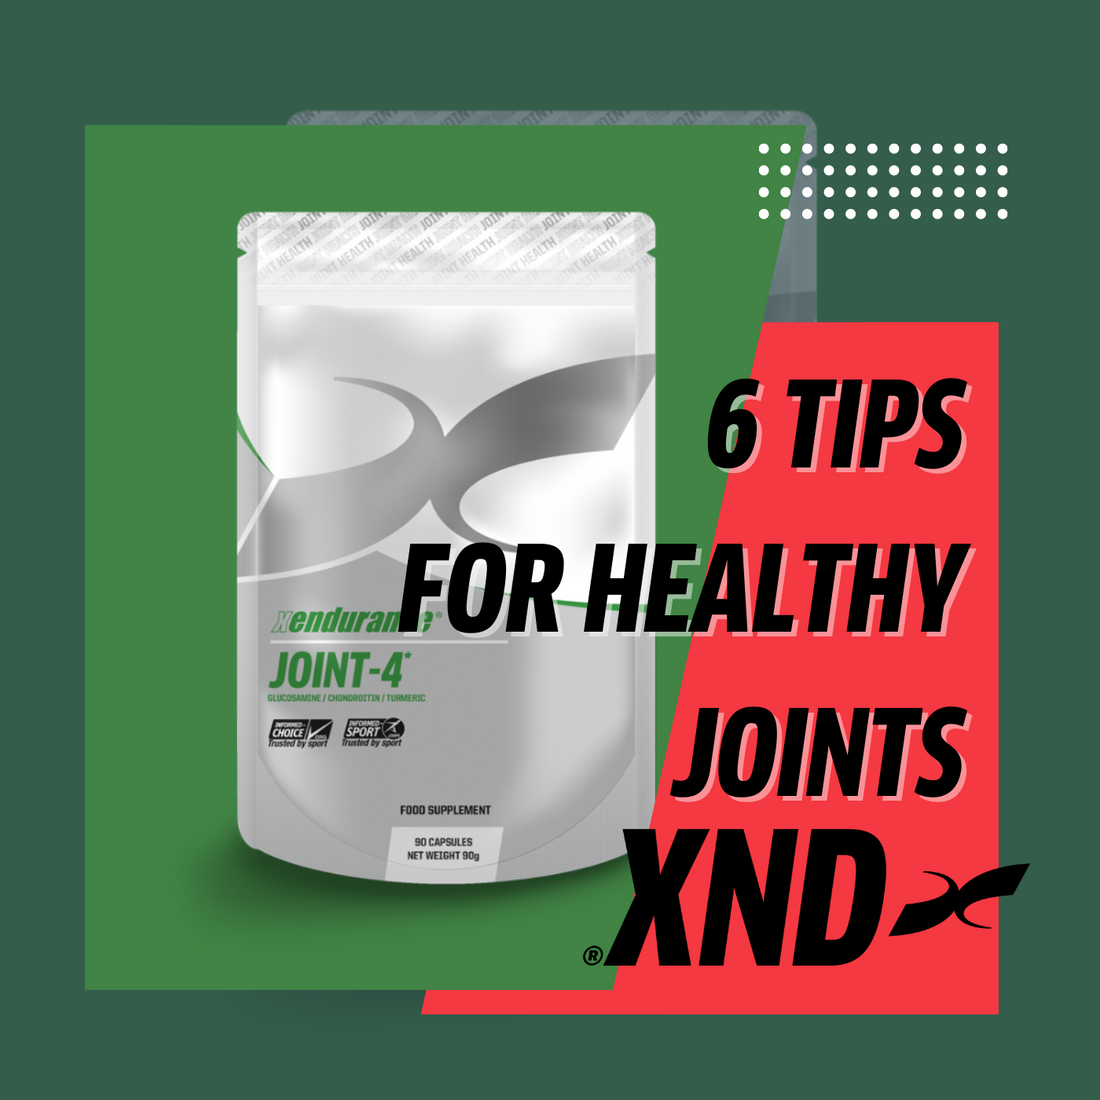 6 Tips for Healthy Joints